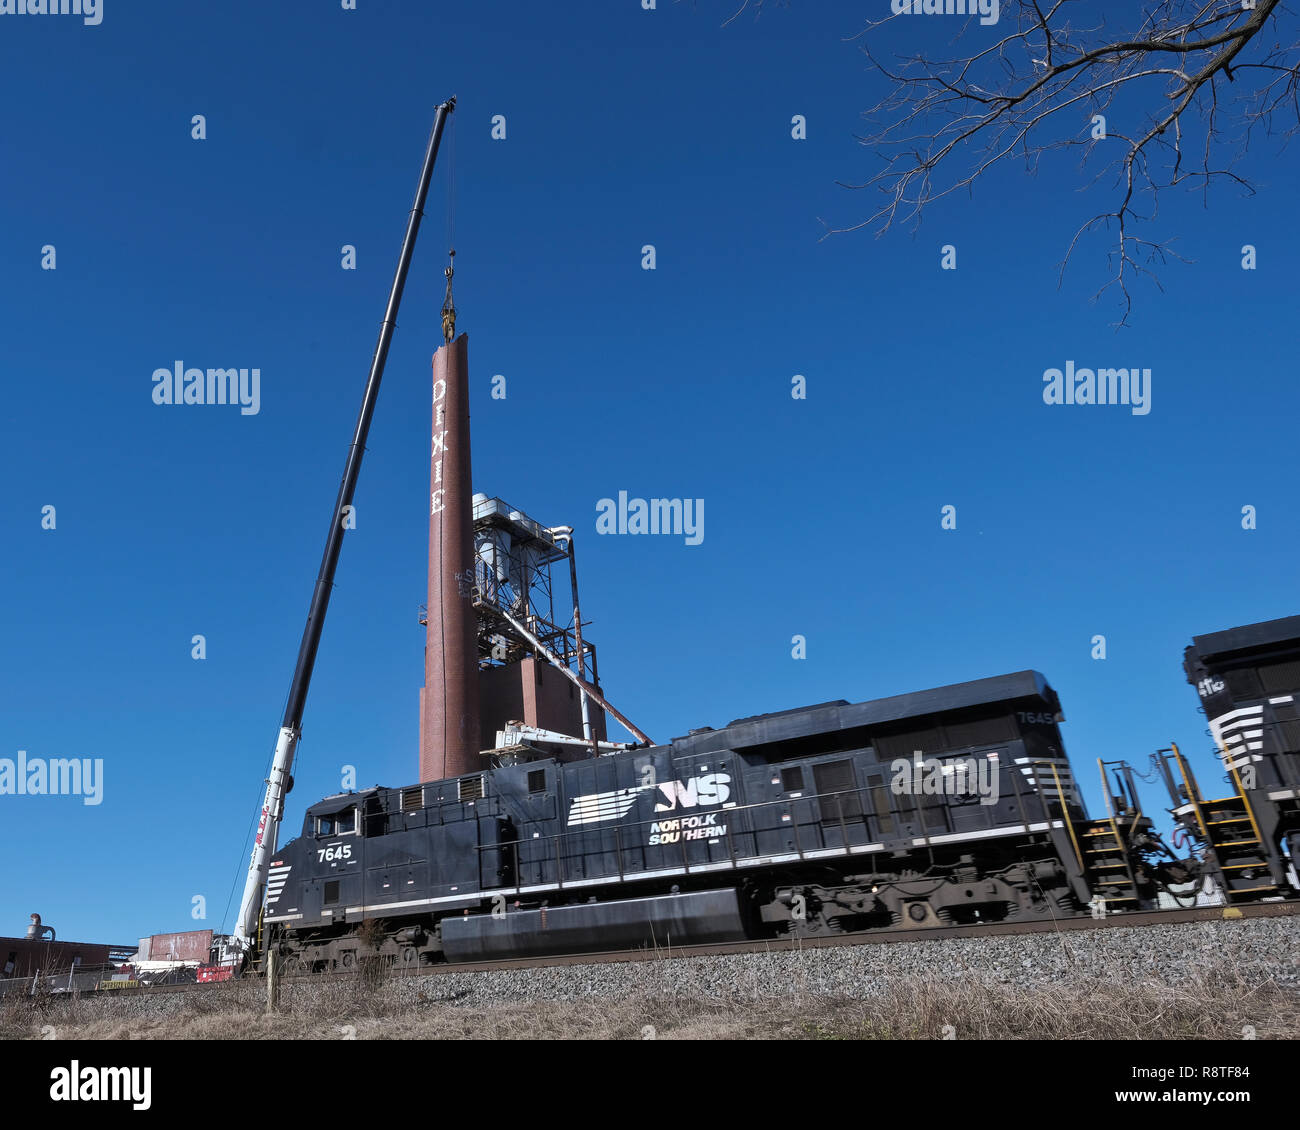 Lexington, North Carolina, USA. 17th December, 2018. Dixie Smokestack demolition. Lexington, NC. Lexington Home Brands Plant No. 1 smoke stack being domolished after fire destroyed the once prosperous manufacturing plant. The smokestack is on Norfolk-Southern right-of-way.  The smokestak was a landmark and reminder to a once thriving furniture industry in the area and it was not practical to preserve. Credit: Patrick Lynch/Alamy Live News Stock Photo